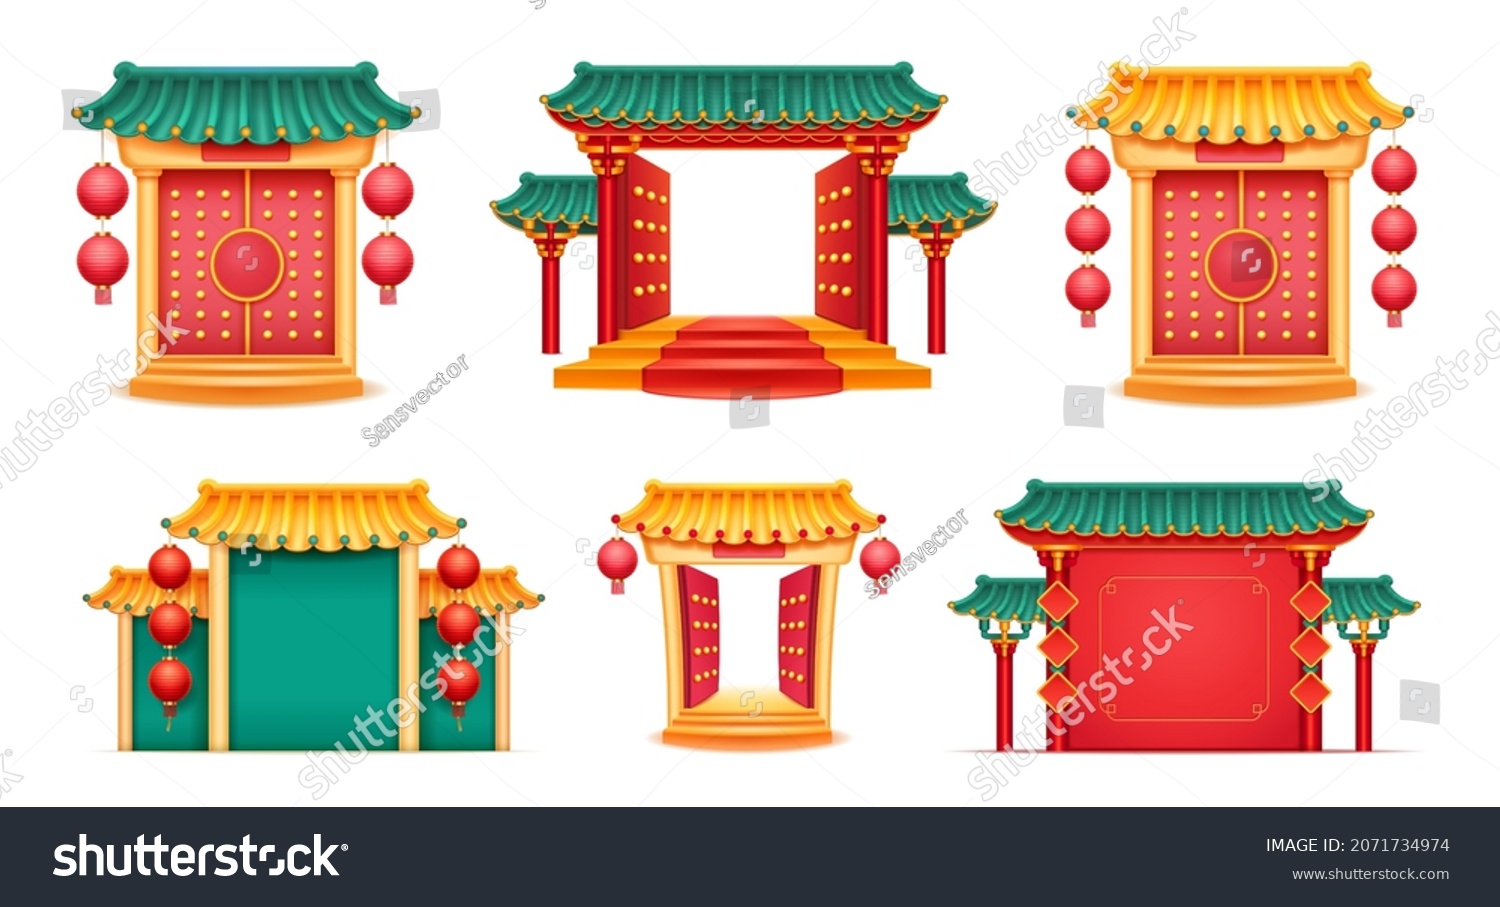 SVG of Japanese and Chinese architecture and religious buildings, isolated set of castles with open gates, temples with hanging paper lanterns and columns, steps and paths. CNY holiday celebrations svg